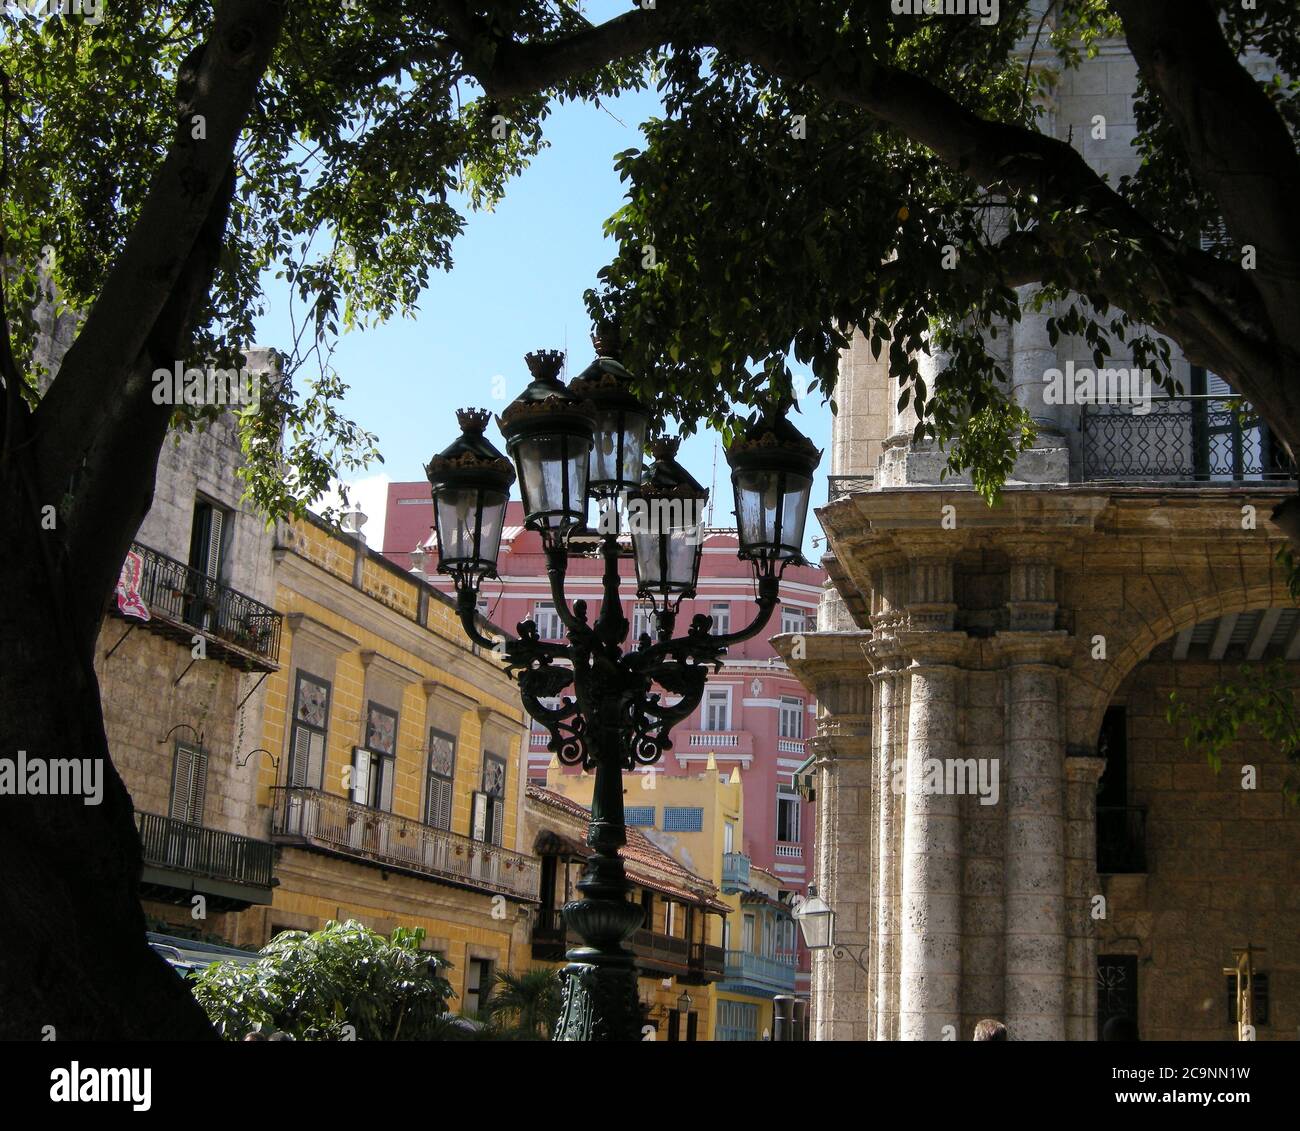 Antique gas streetl lights surronded by beautiful buildings in the old section of Havana Cuba Stock Photo